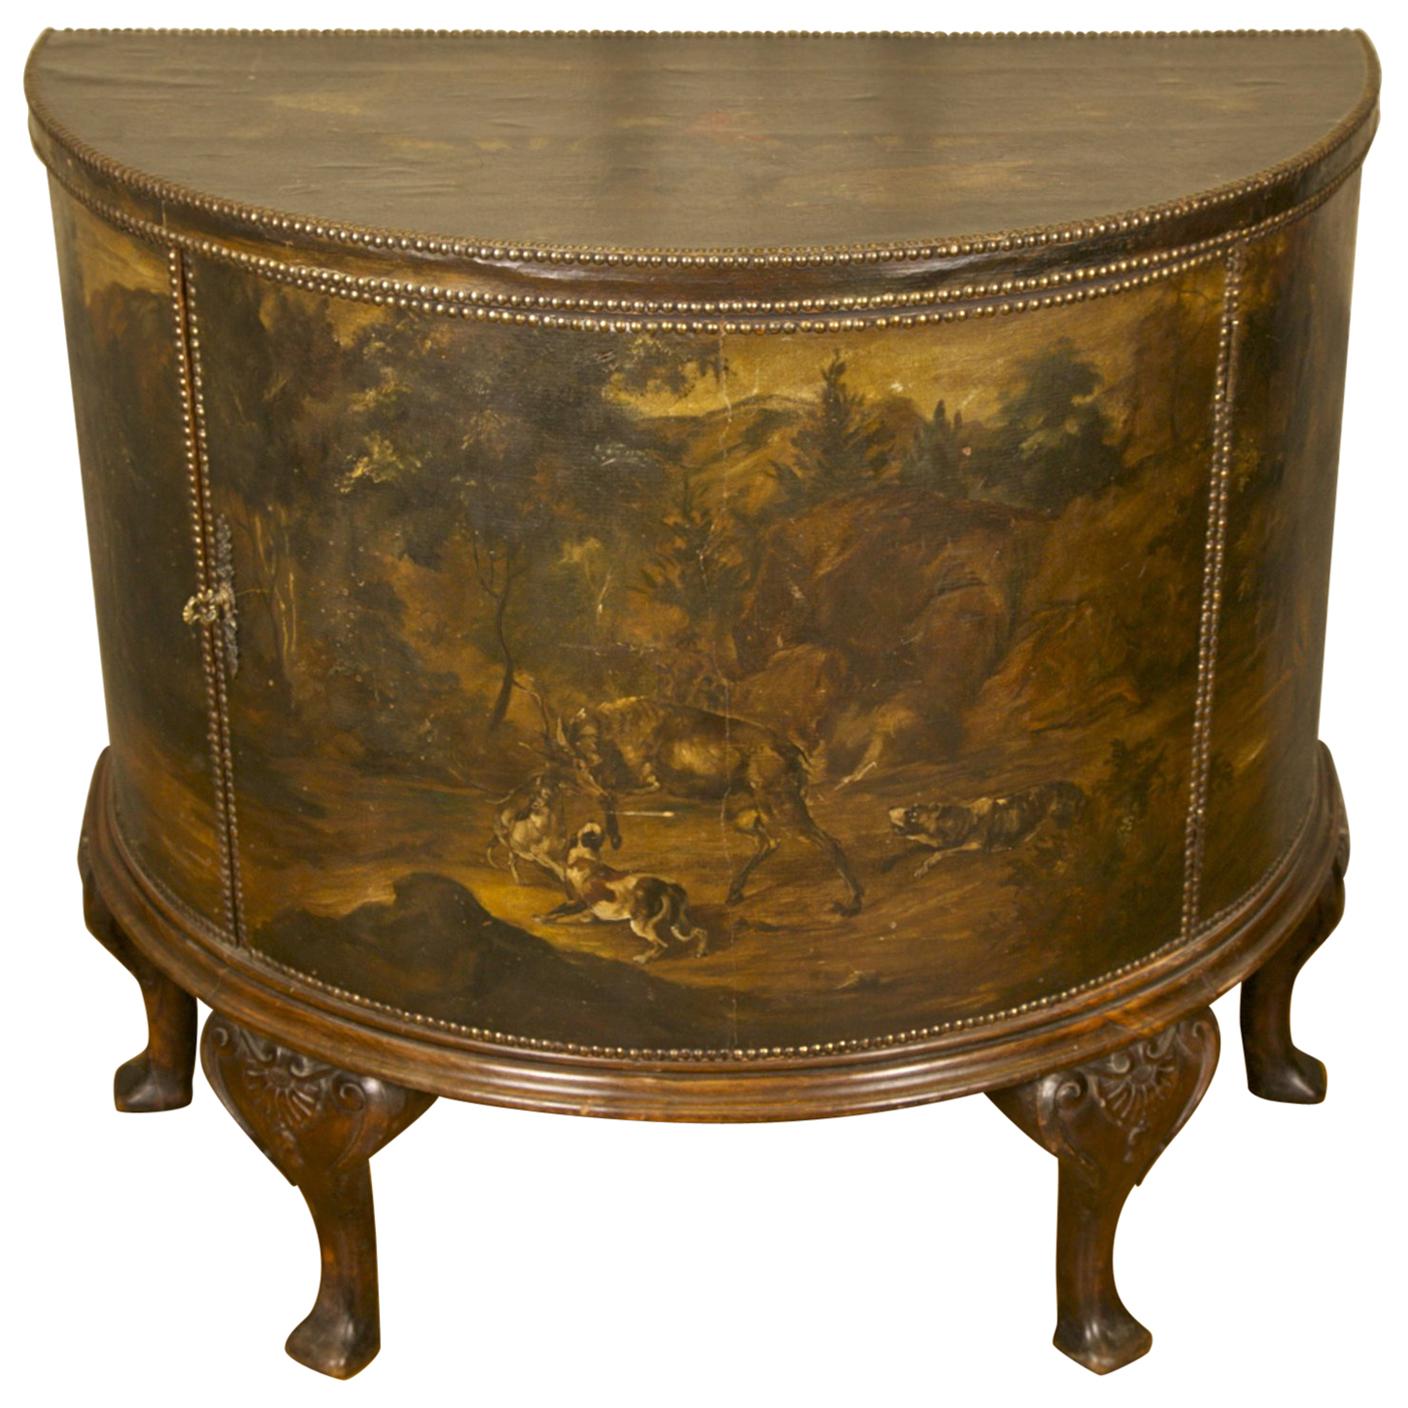 Late 19th Century Hand Painted Demilune Cabinet